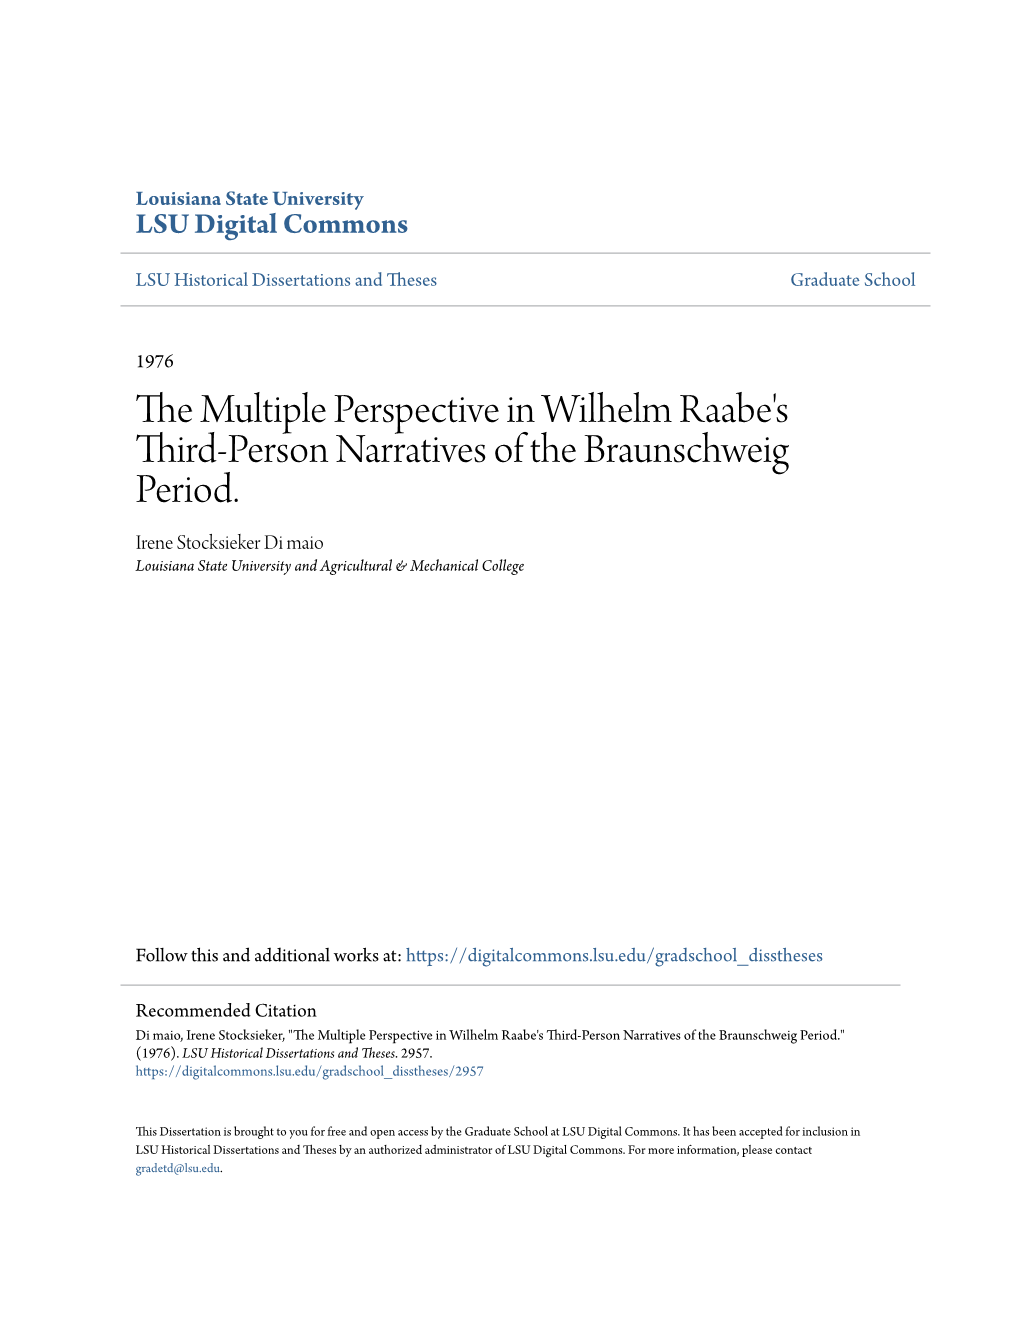 The Multiple Perspective in Wilhelm Raabe's Third-Person Narratives of the Braunschweig Period